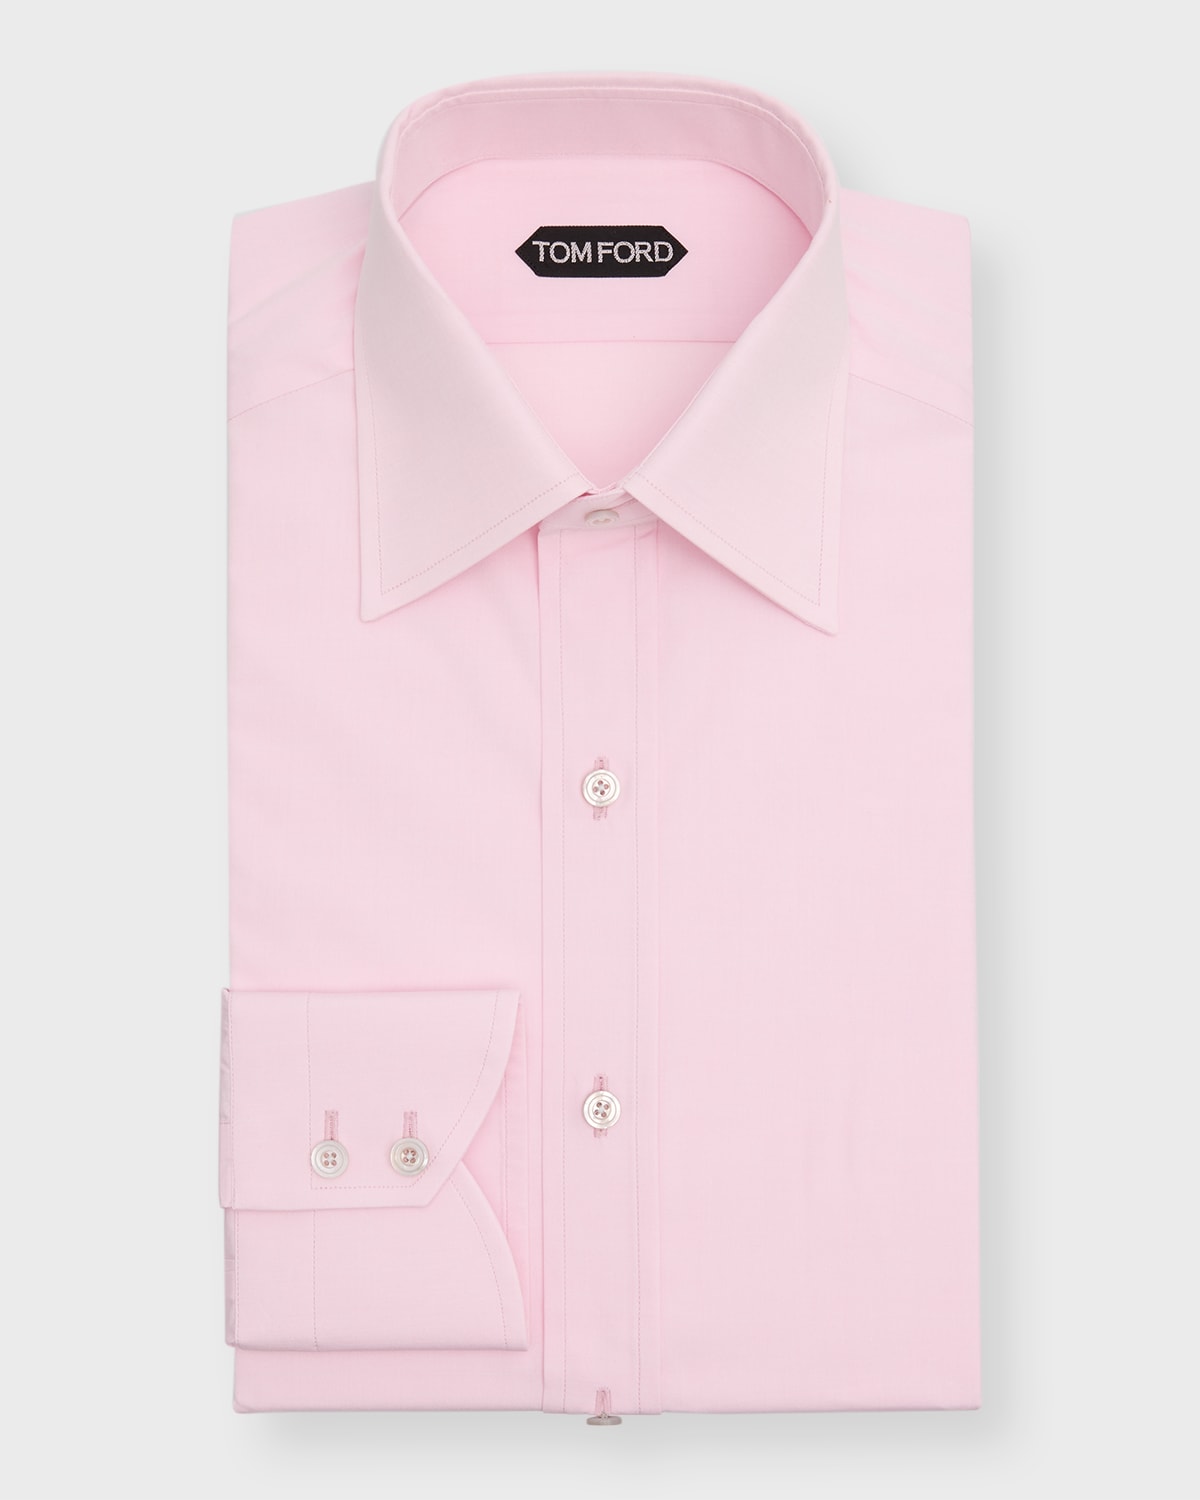 Tom Ford Men's Cotton Dress Shirt In Pink